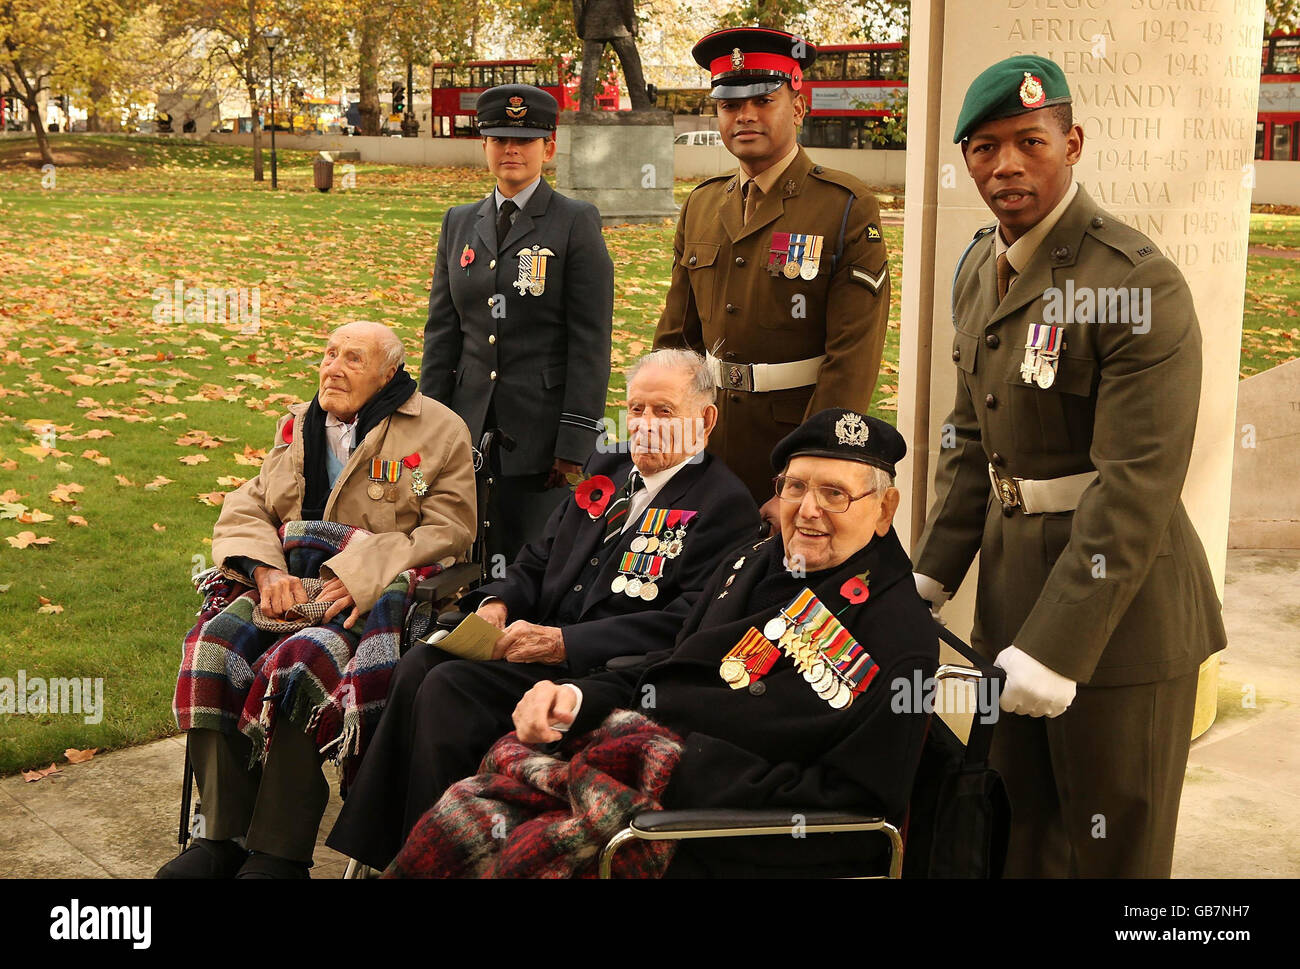 First World War veterans (front L-R) 112 year old Henry Allingham, 110 year old Harry Patch and 108 year old Bill Stone, escorted by Lieutenant Michelle Goodman holder of the Distinguished Flying Cross (back L), Corporal Johnson Beharry, holder of The Victoria Cross, and Marine Mkhuseli Jones, holder of Military Cross (R), gather at the start of the Armistice day commemorations. Stock Photo